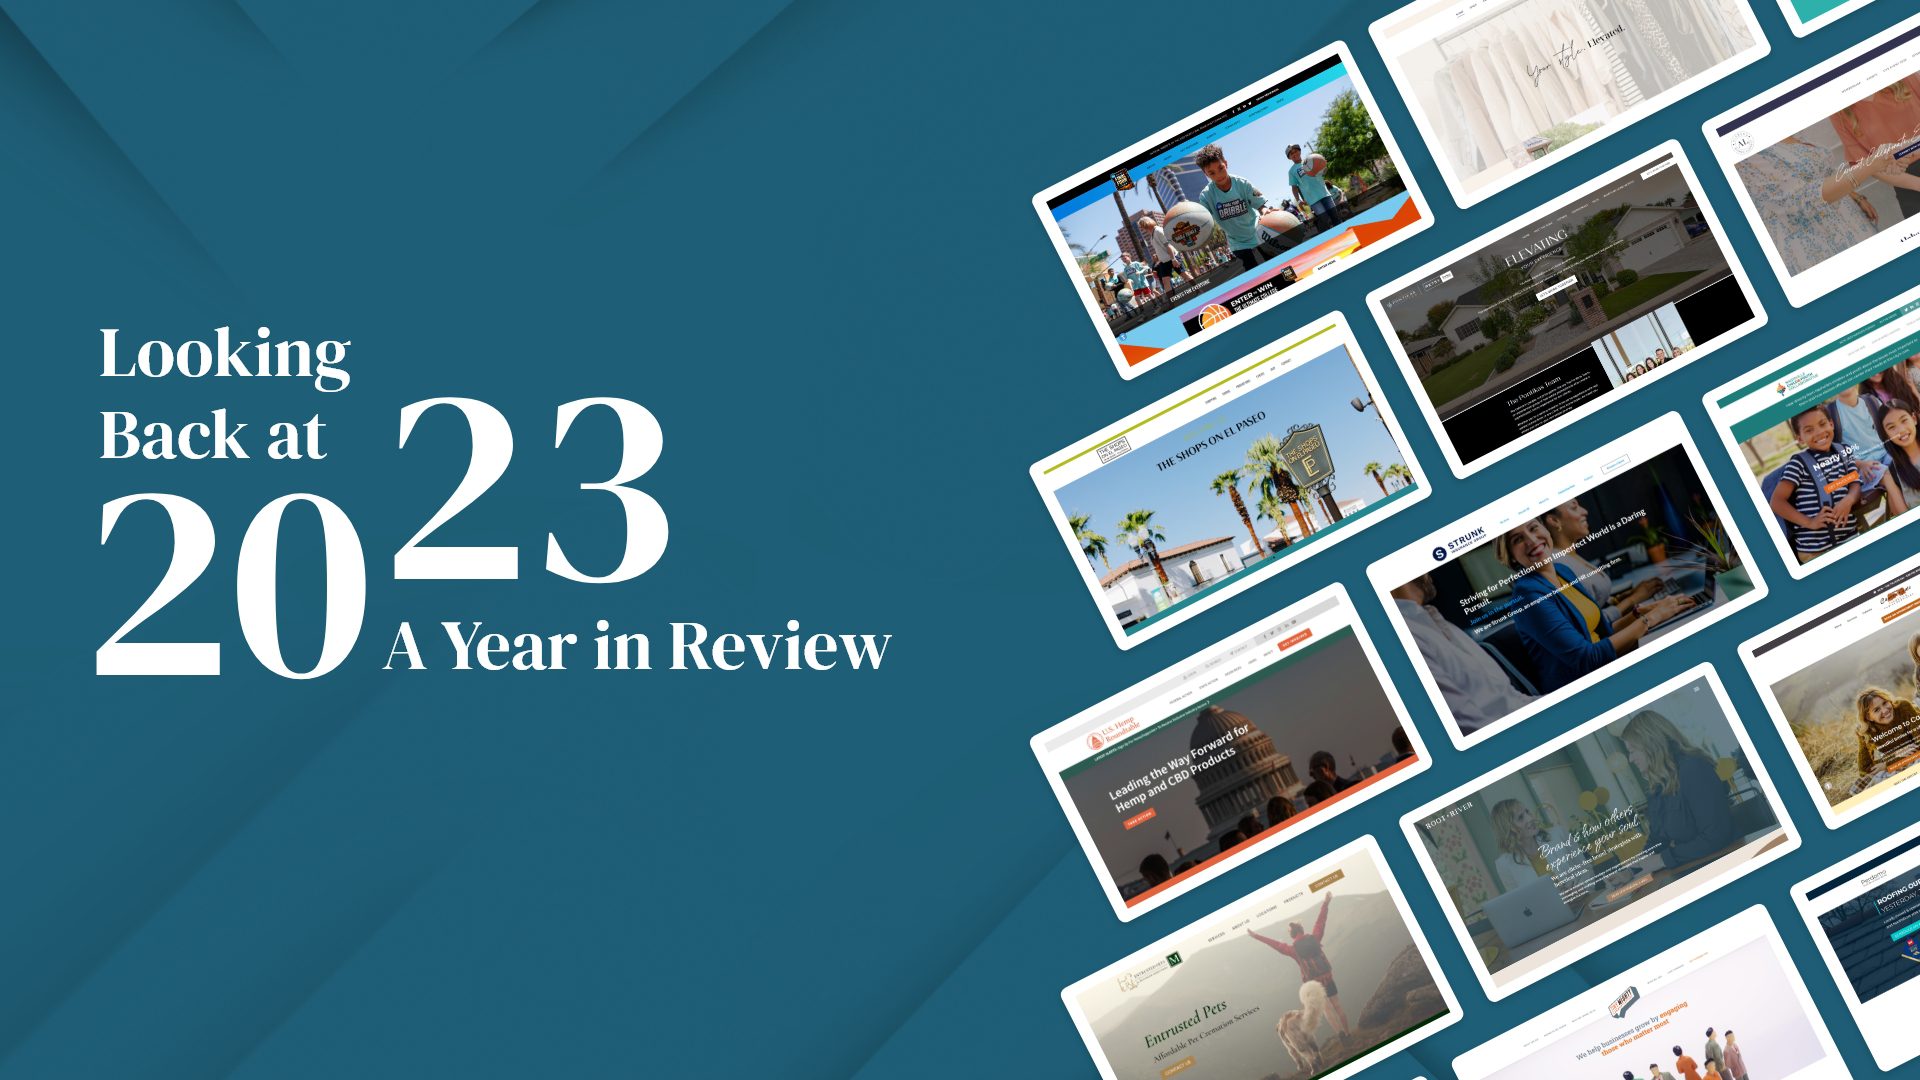 Looking Back at 2023: A Year in Review